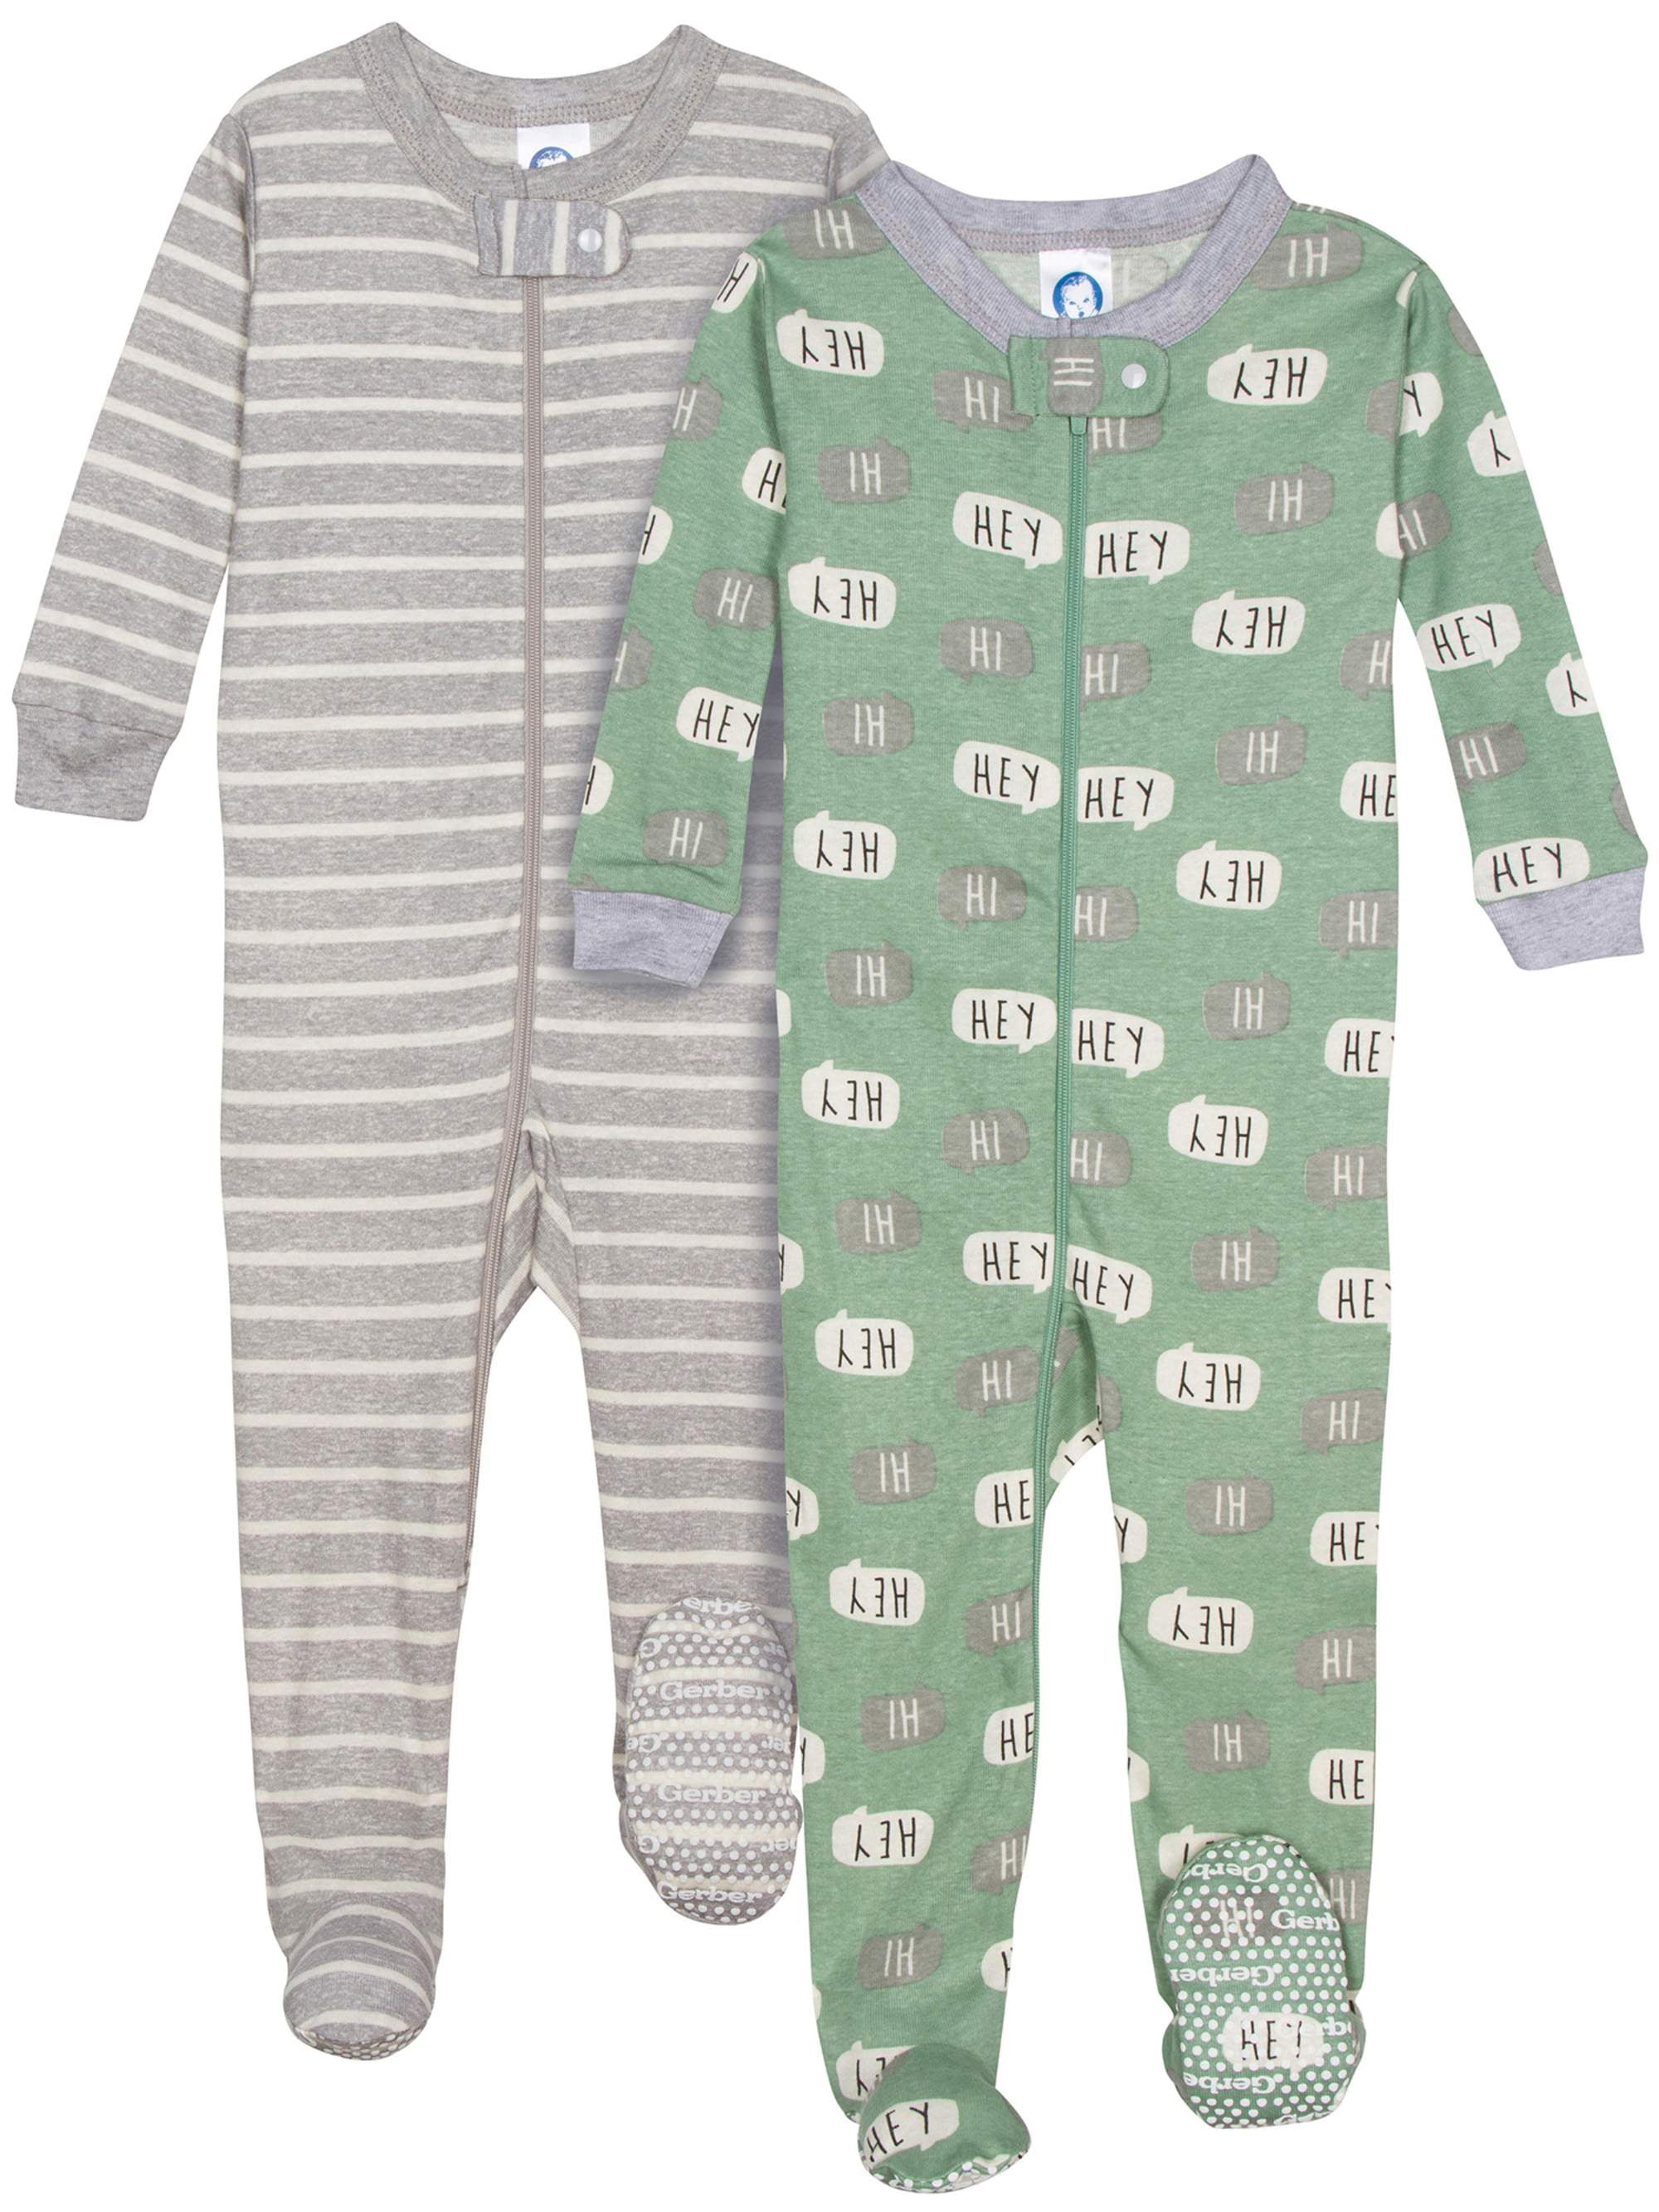 Gerber Baby Boys Organic 2 Pack Cotton Footed Unionsuit 3 months DINO 